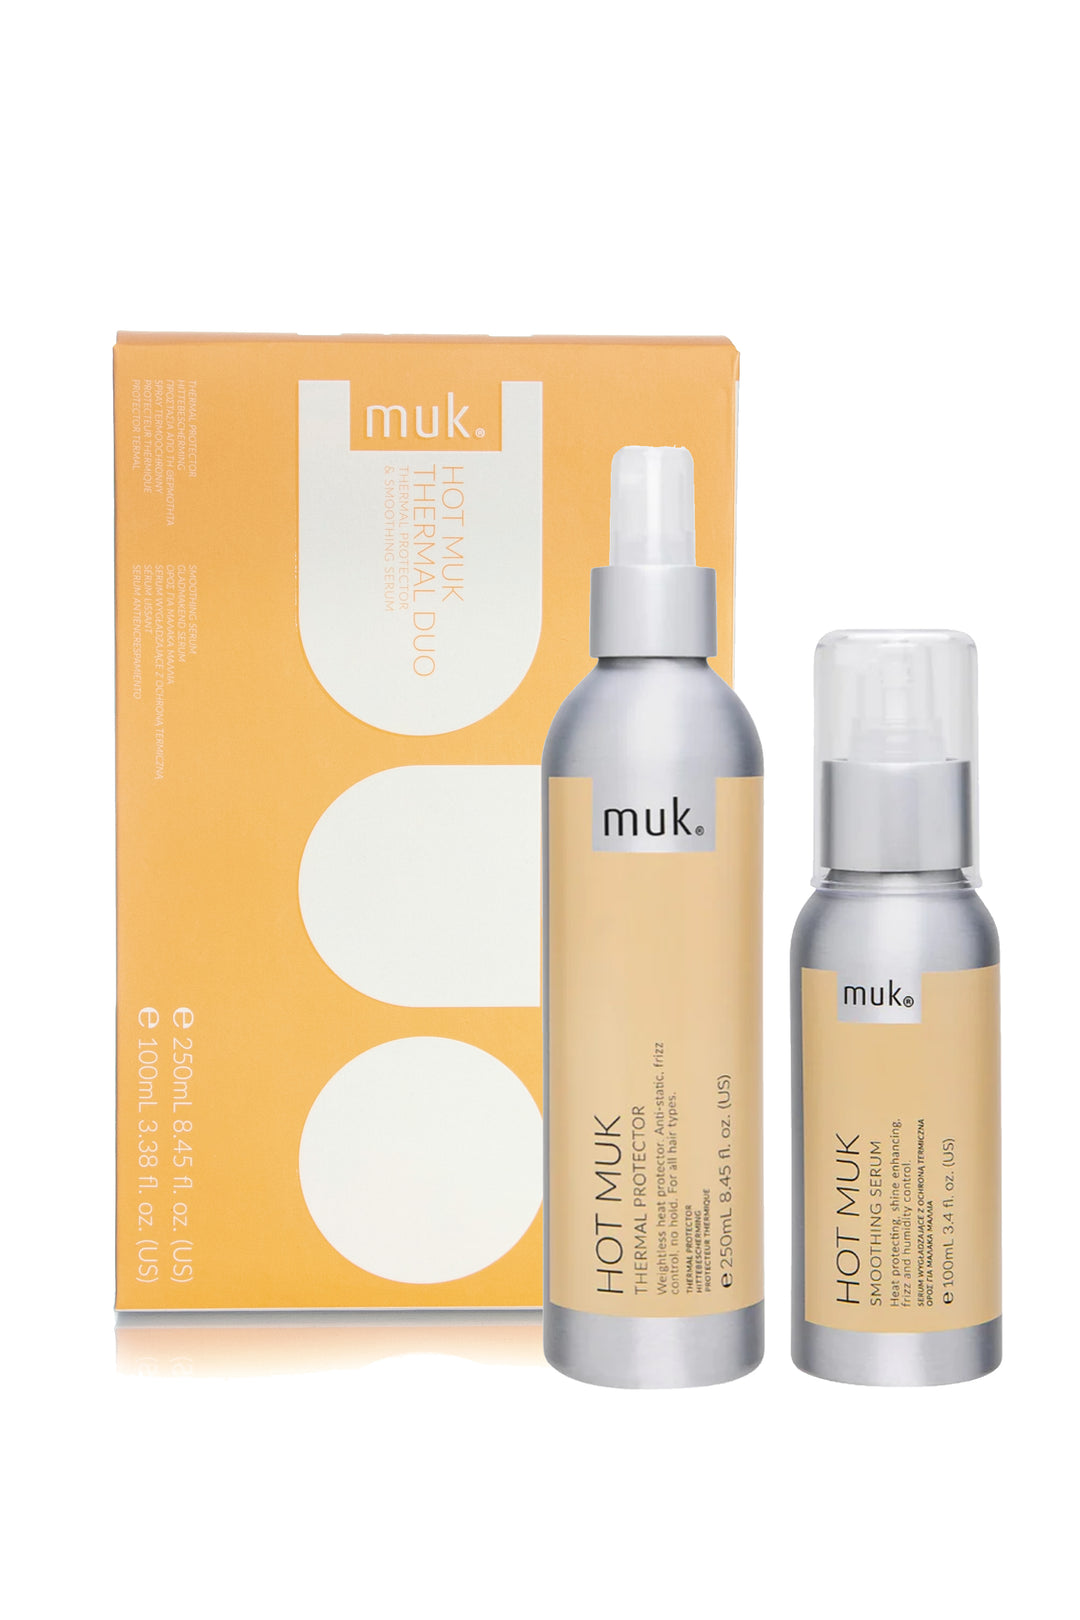 Muk Duo Gift Pack | Various Styles